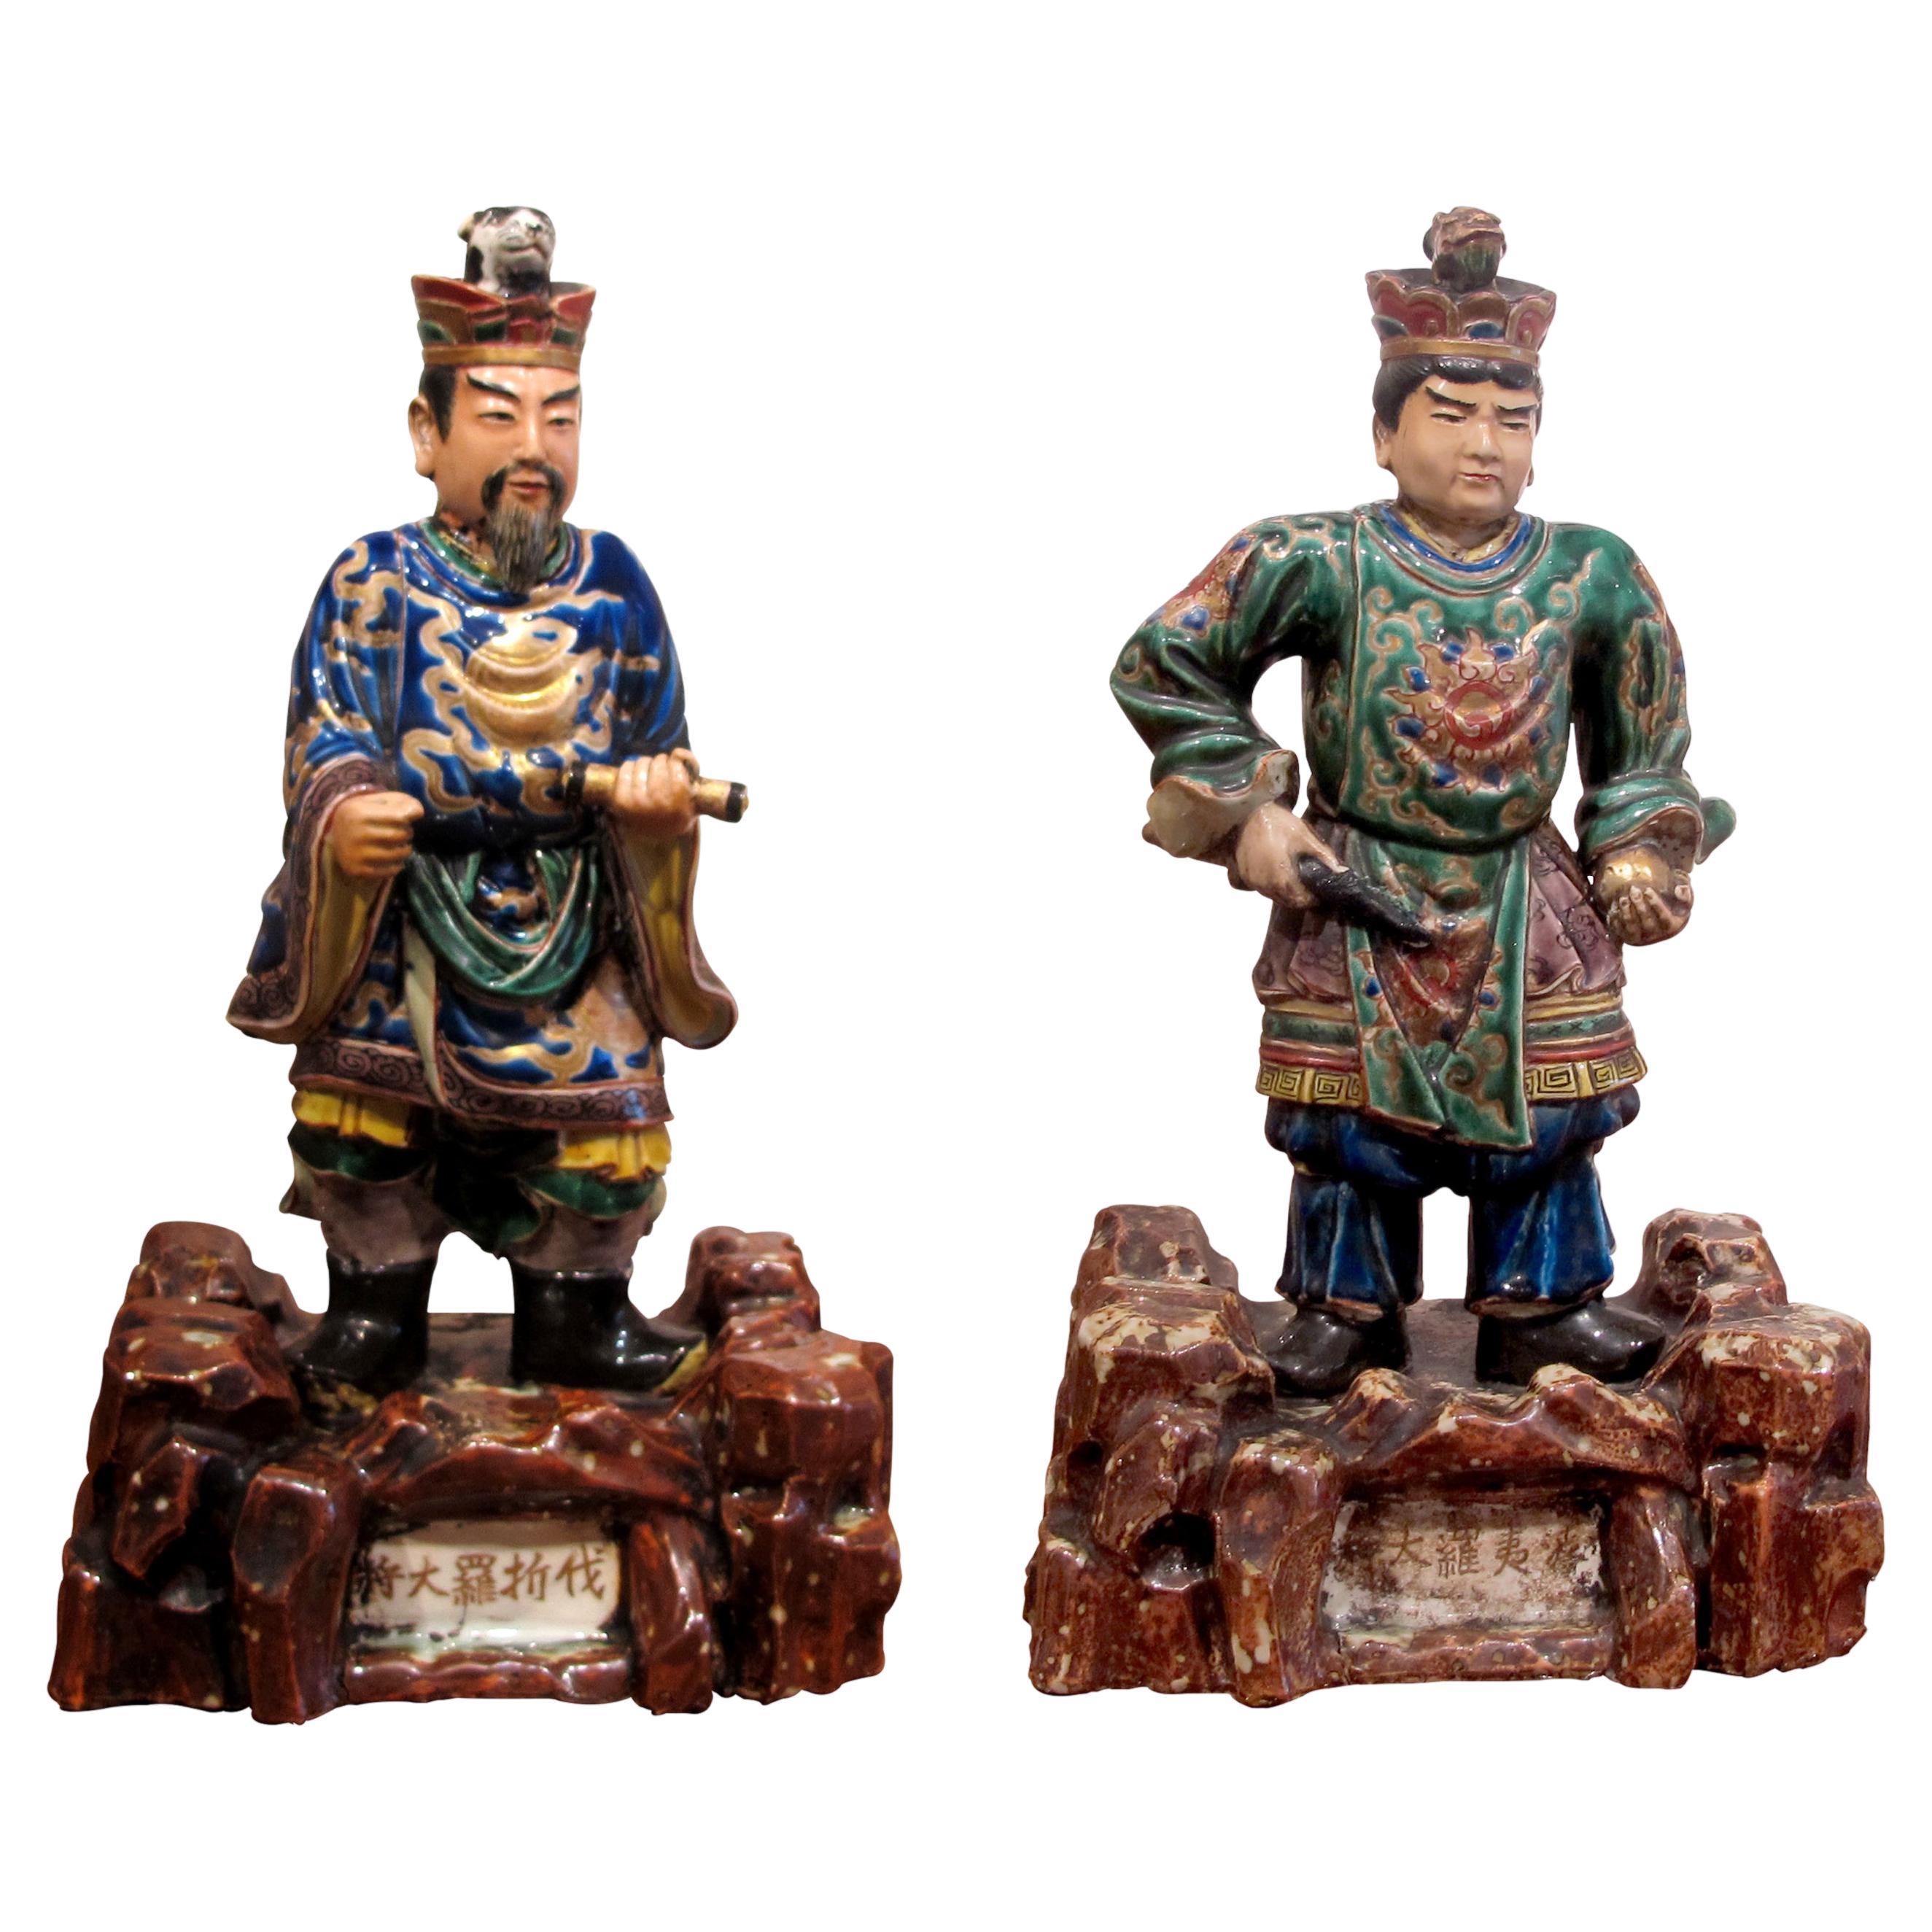 Set of Two Chinese Porcelain Statues with Zodiac Hat Symbols, 1900s